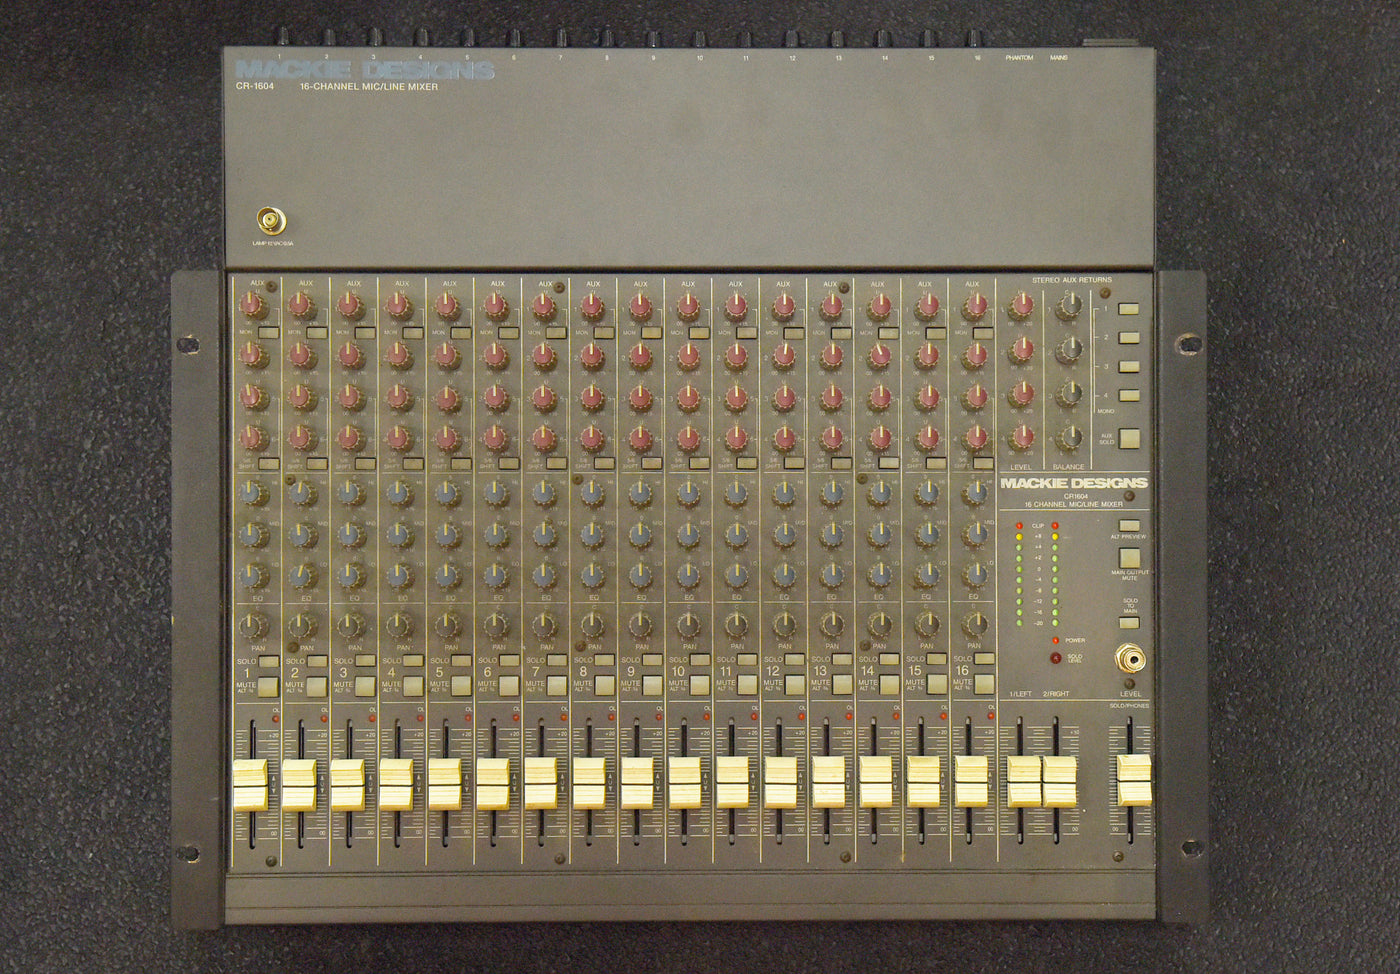 CR-1604 - 16 Channel Mic/Line Mixer, Recent